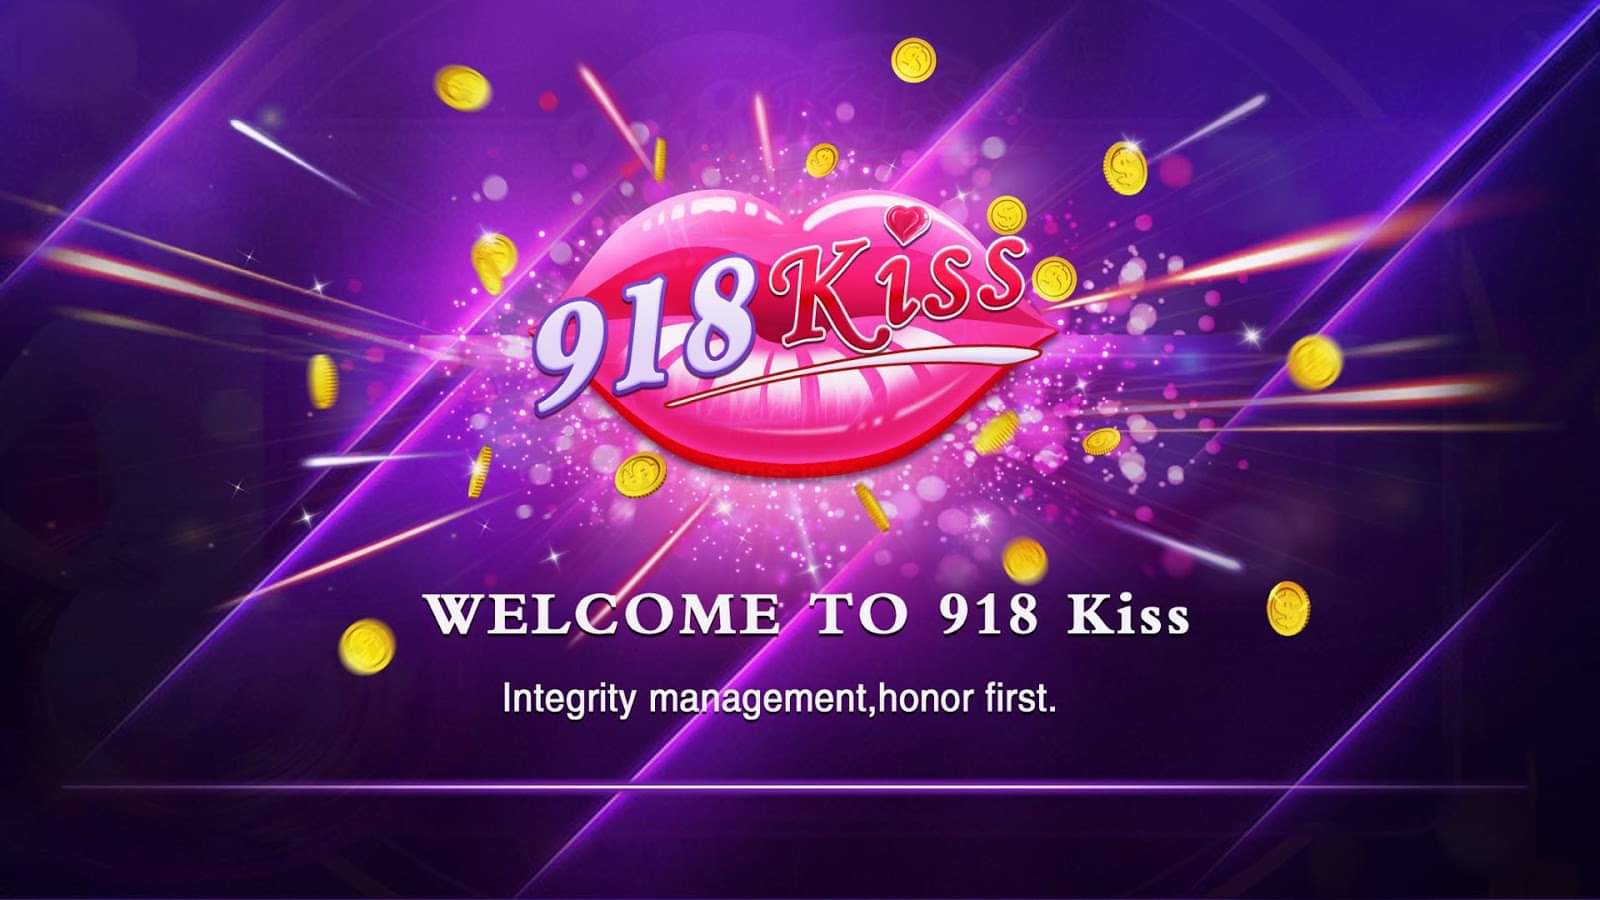 What Makes 918kiss So Famous In Asia